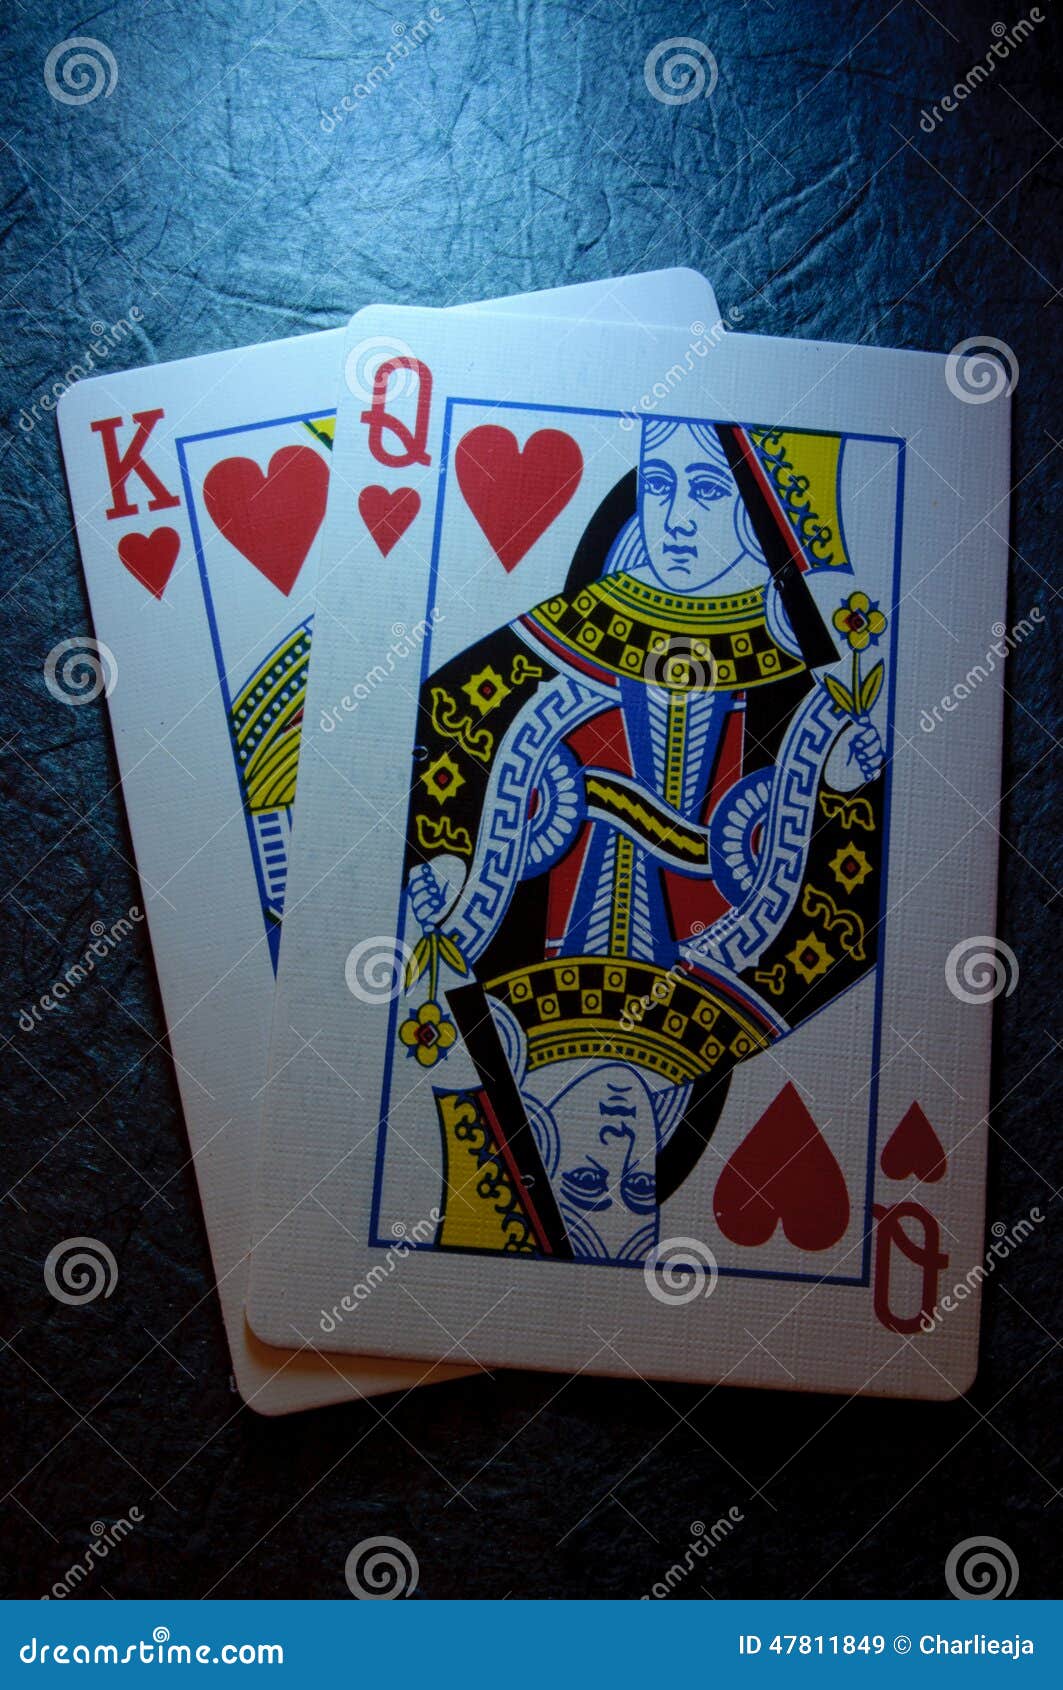 King And Queen Of Hearts Stock Photo - Image: 47811849